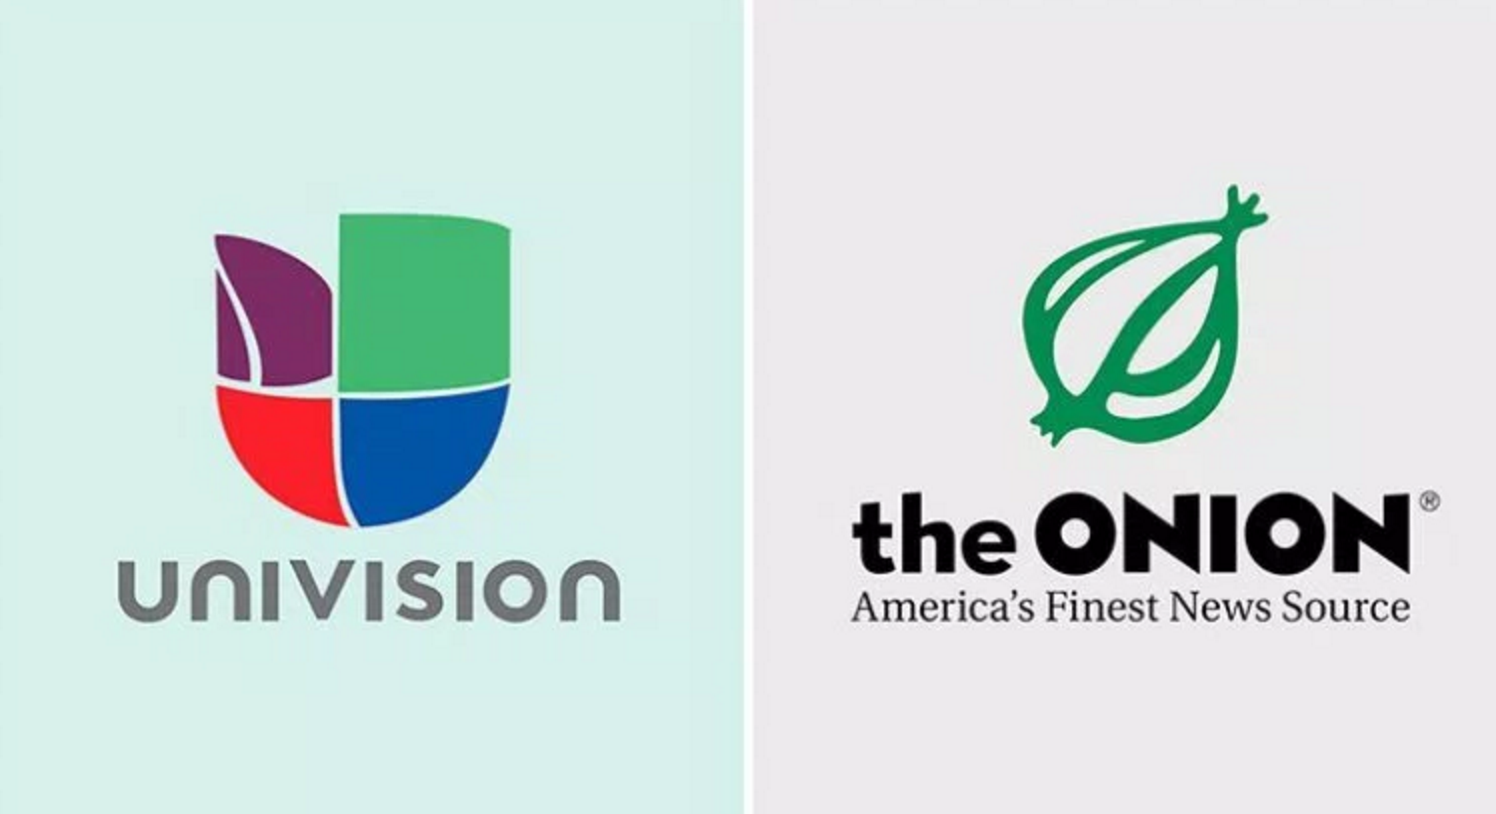 Actual TV network buys stake in satirical news network (Univision invests in The Onion/AV Club/Clickhole to bolster Fusion)